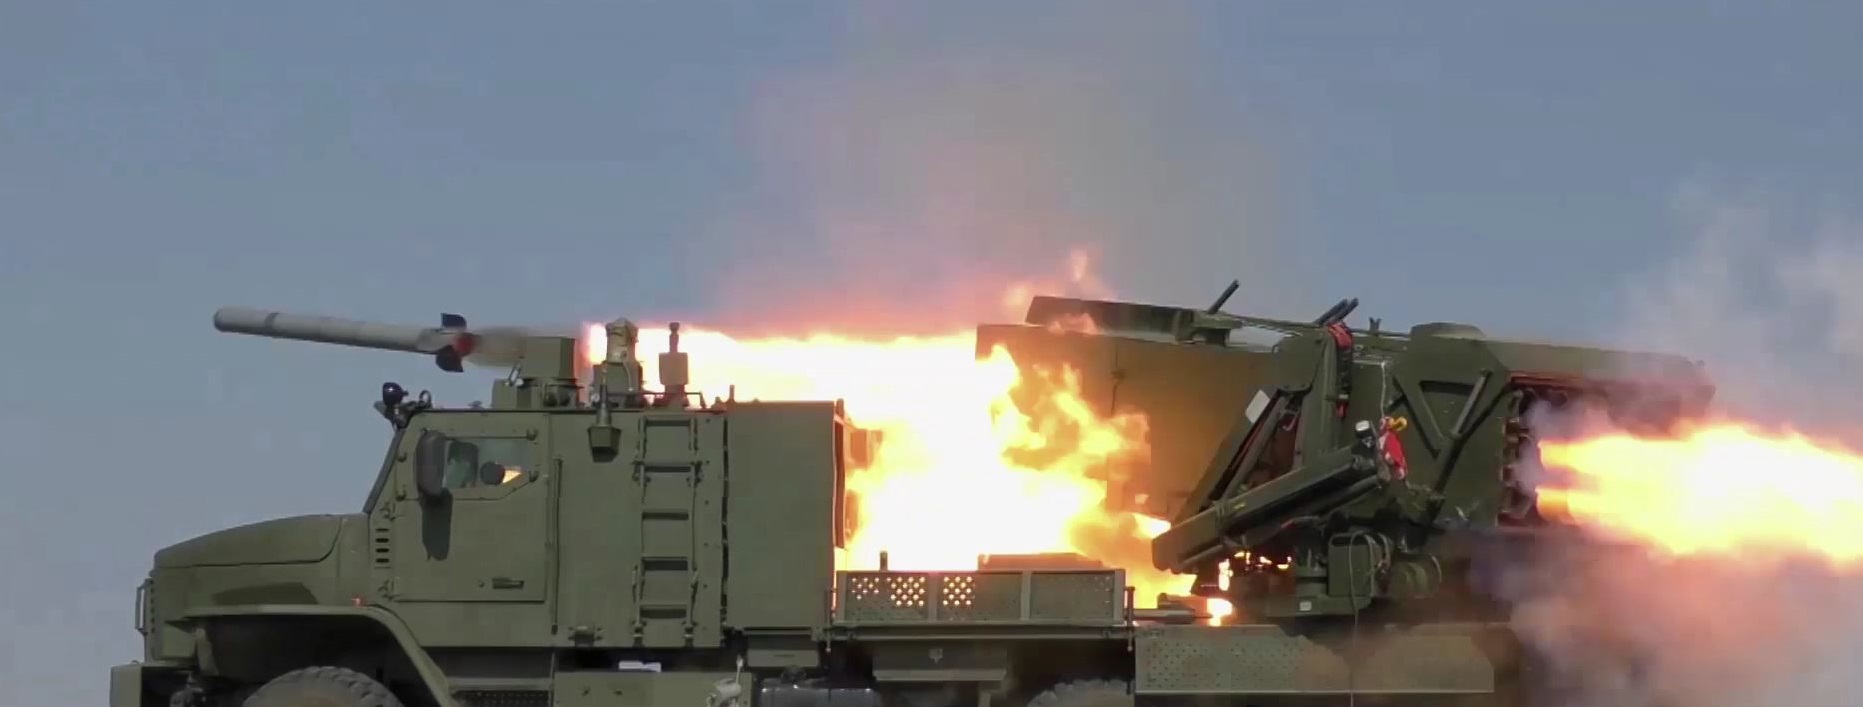 The Russians again claimed that Ukraine was using the latest TOS-2 "Tosochka" heavy flamethrower system with thermobaric missiles, but again without evidence